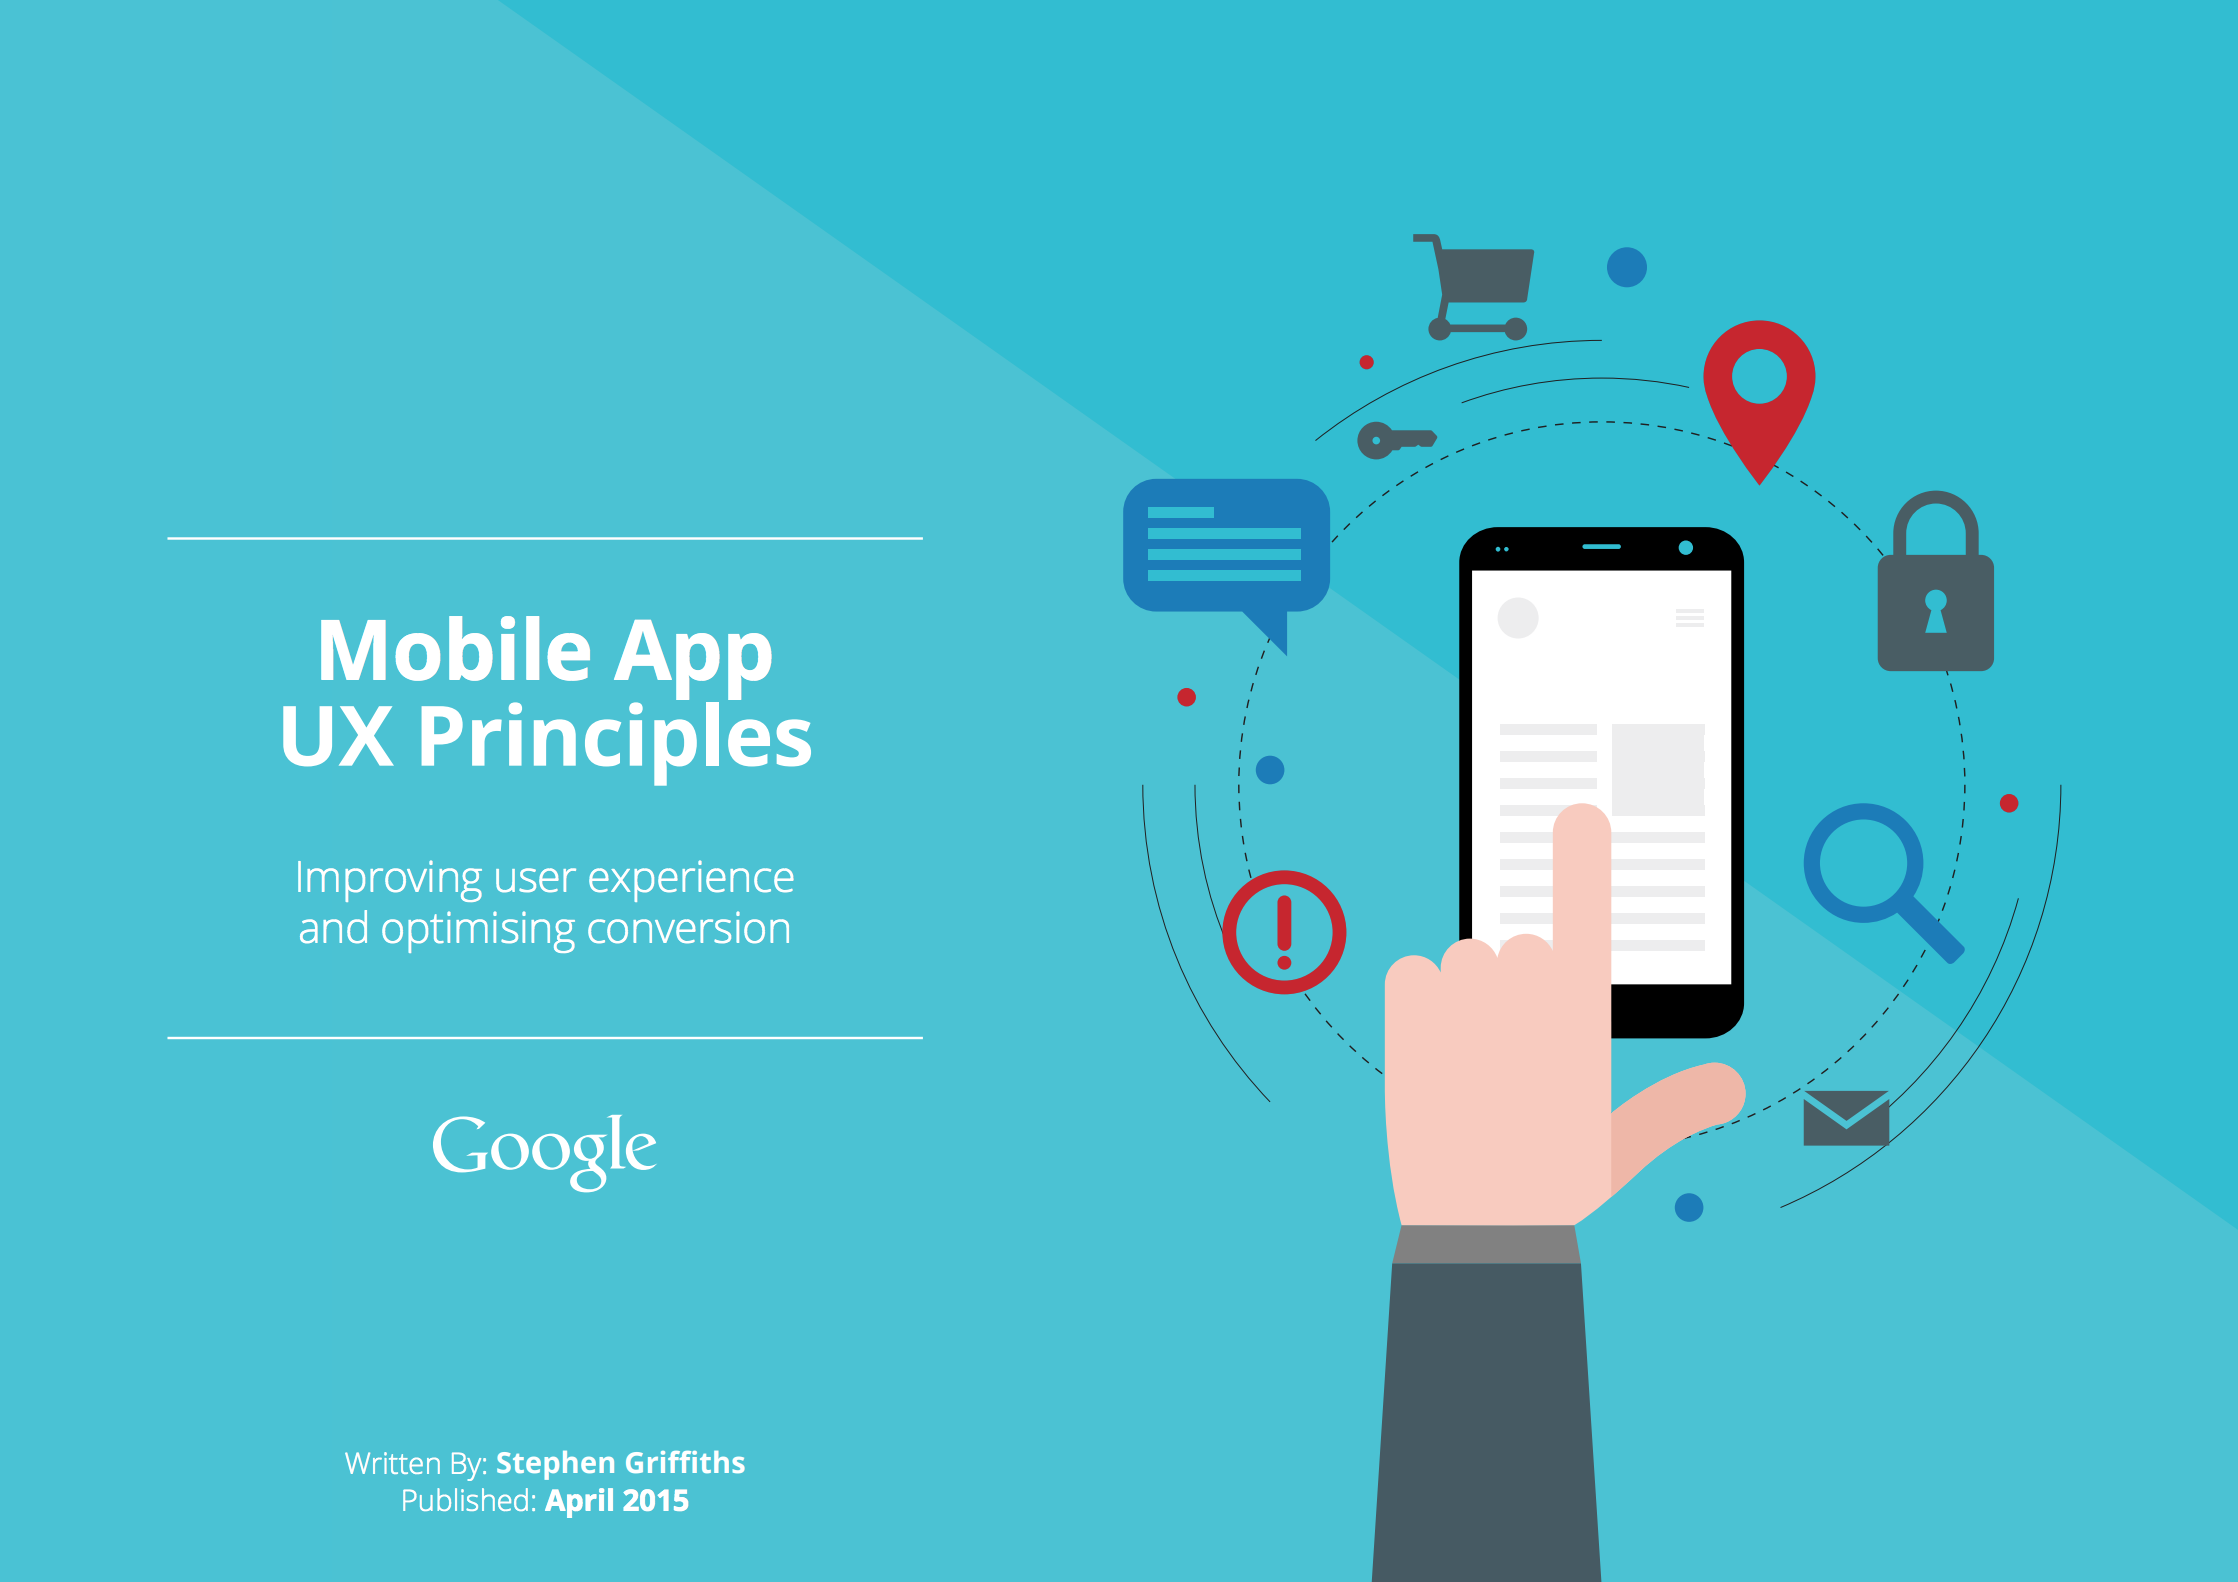 Google Mobile App UX Principles (by Stephen Griffiths)